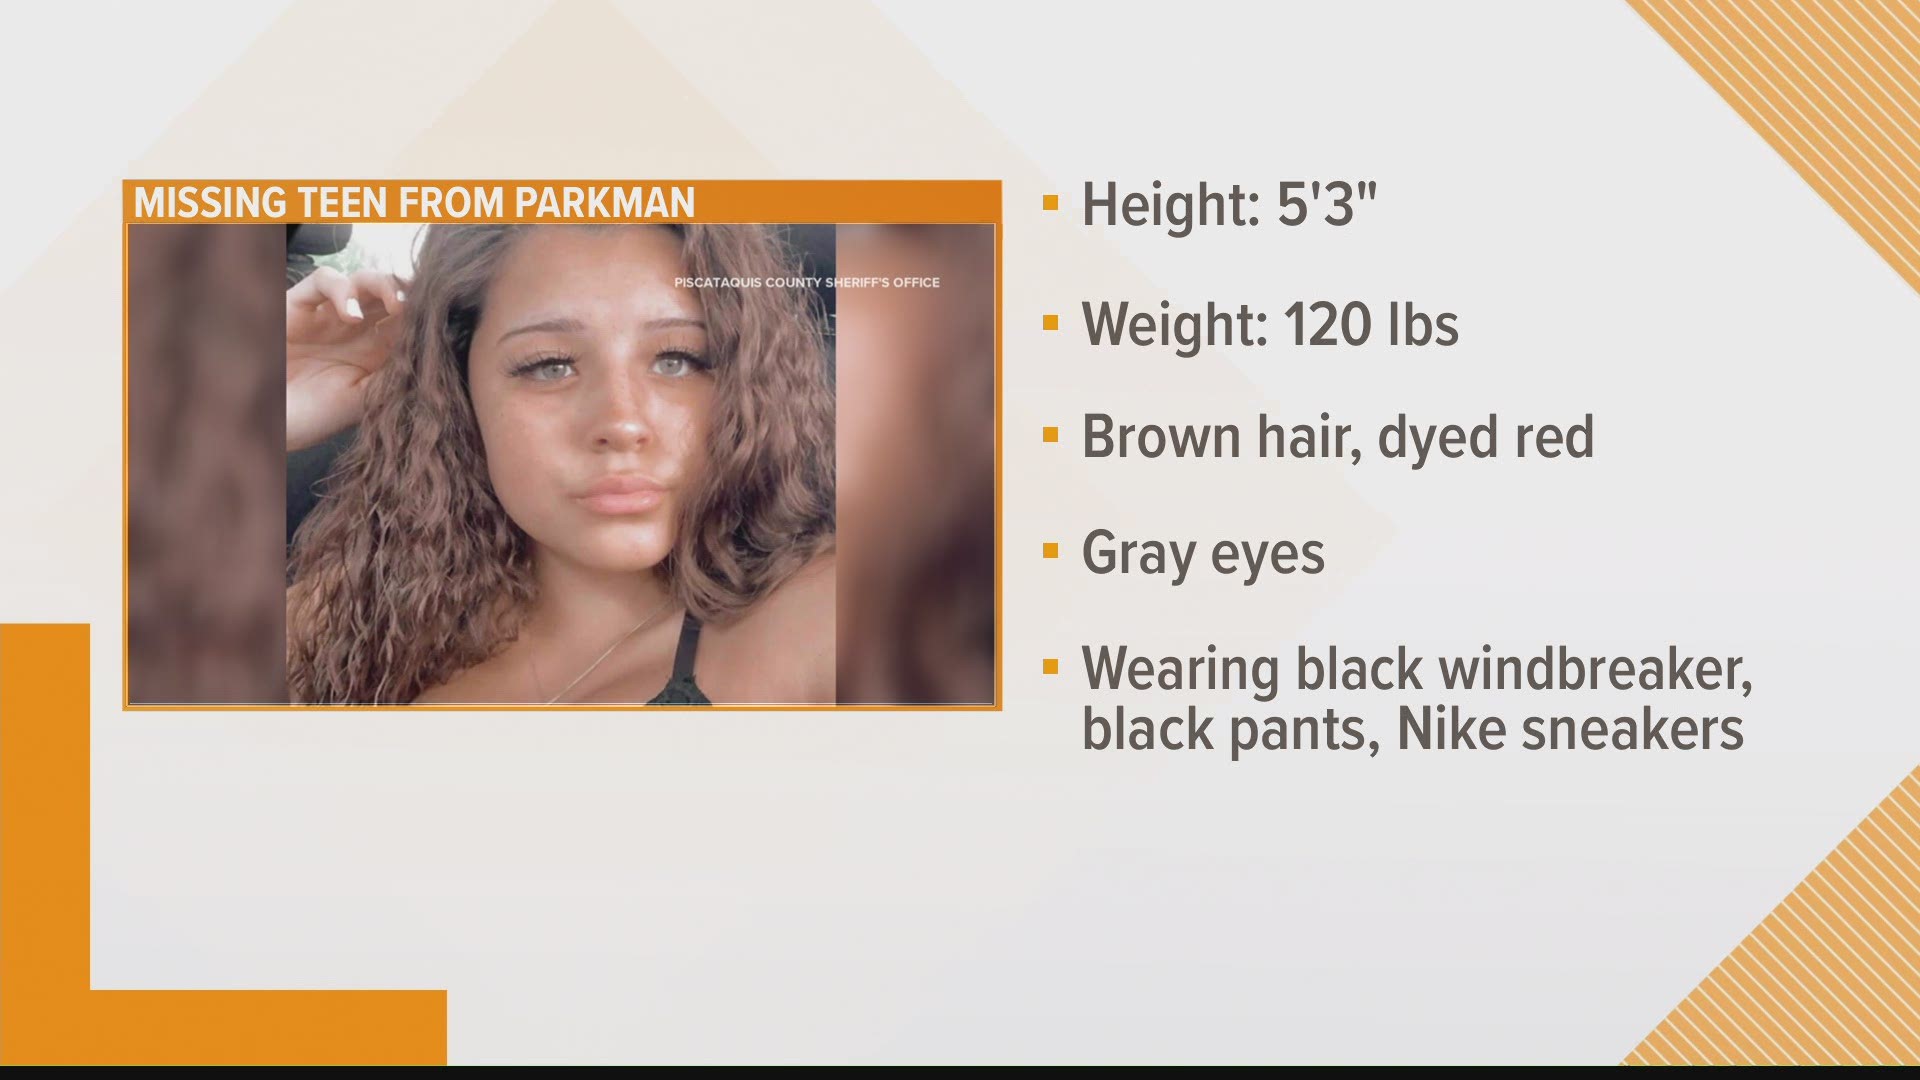 14 year-old Reese Hannan was last seen Friday night. She is 5'3", weighs about 120 pounds, and has brown hair that is dyed red.